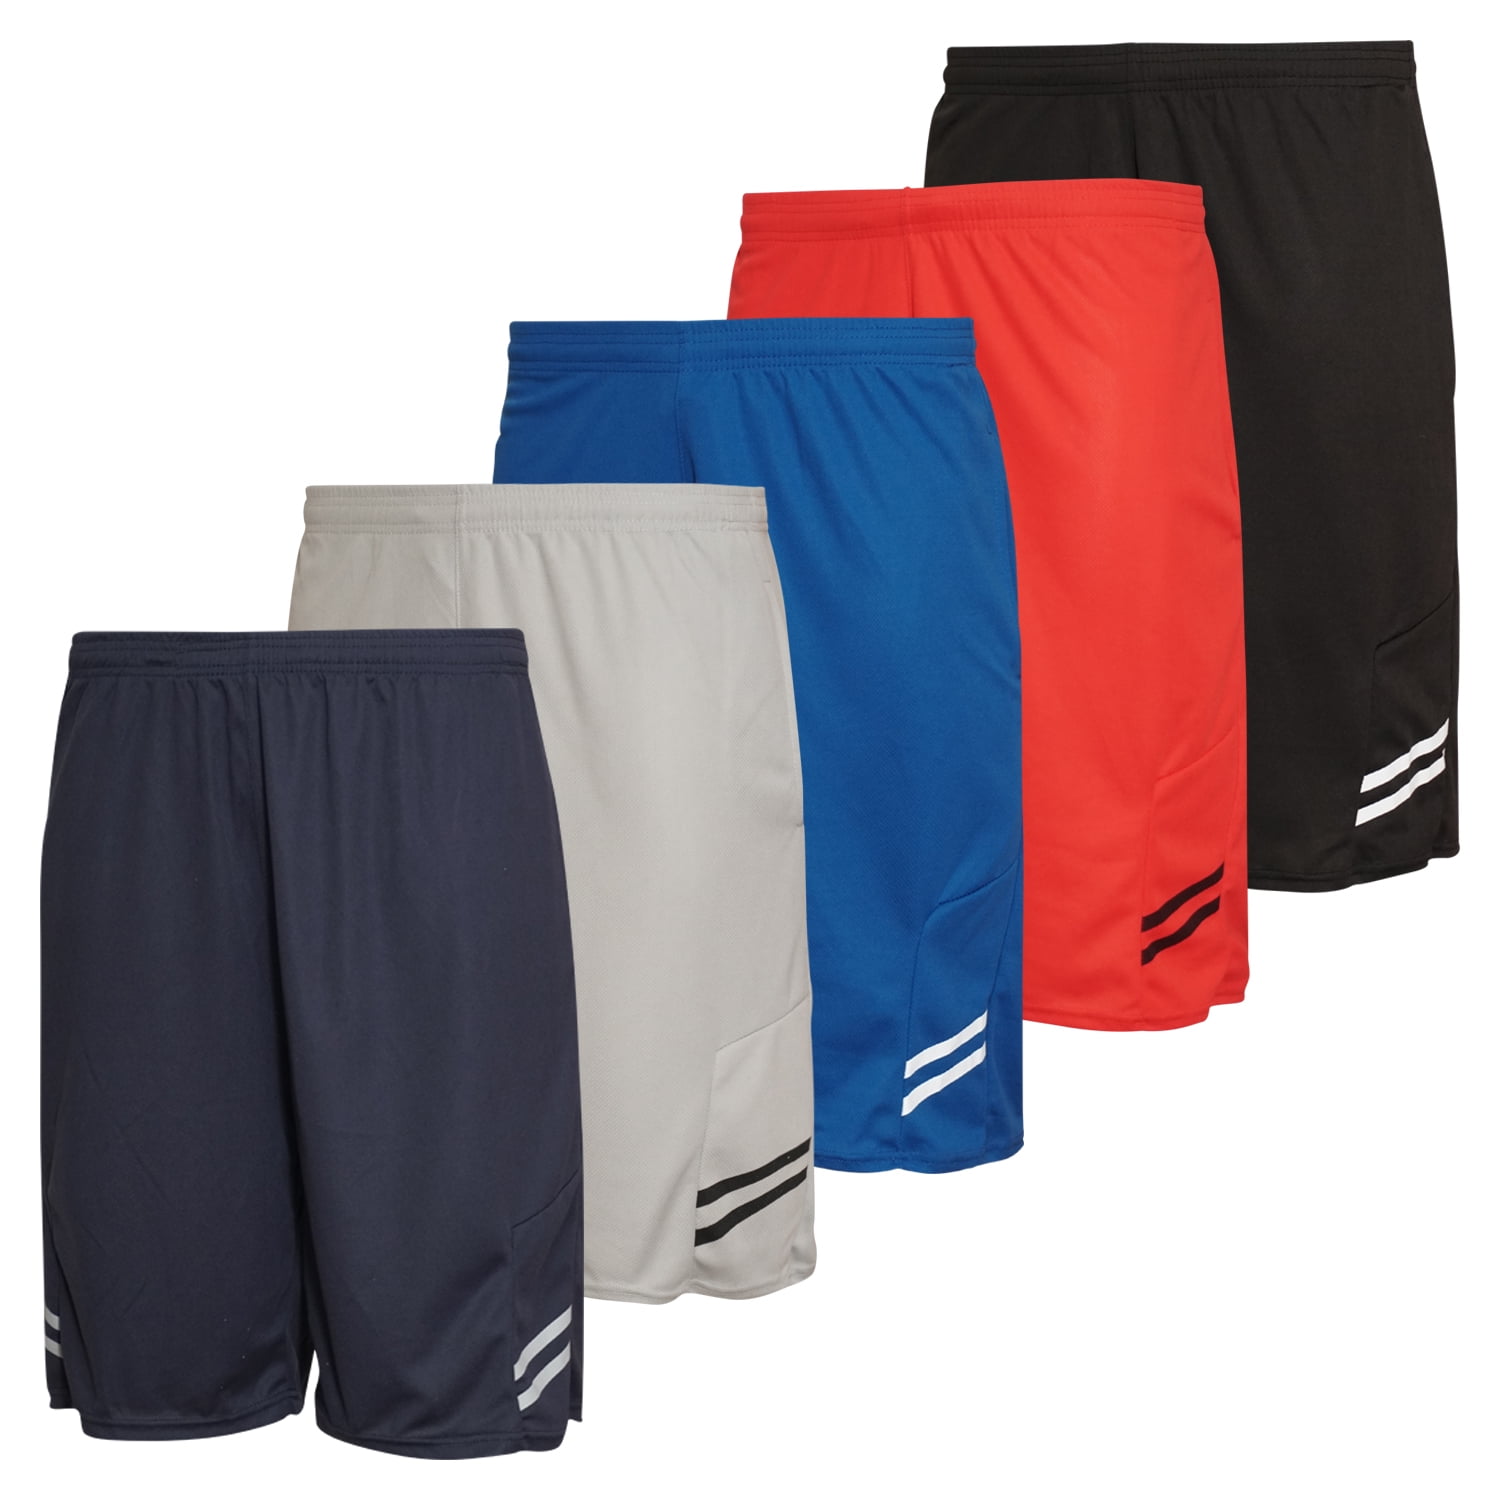 Active Performance Wrestling Gym Shorts TAPOUT Boys' Athletic Shorts 4 Pack 